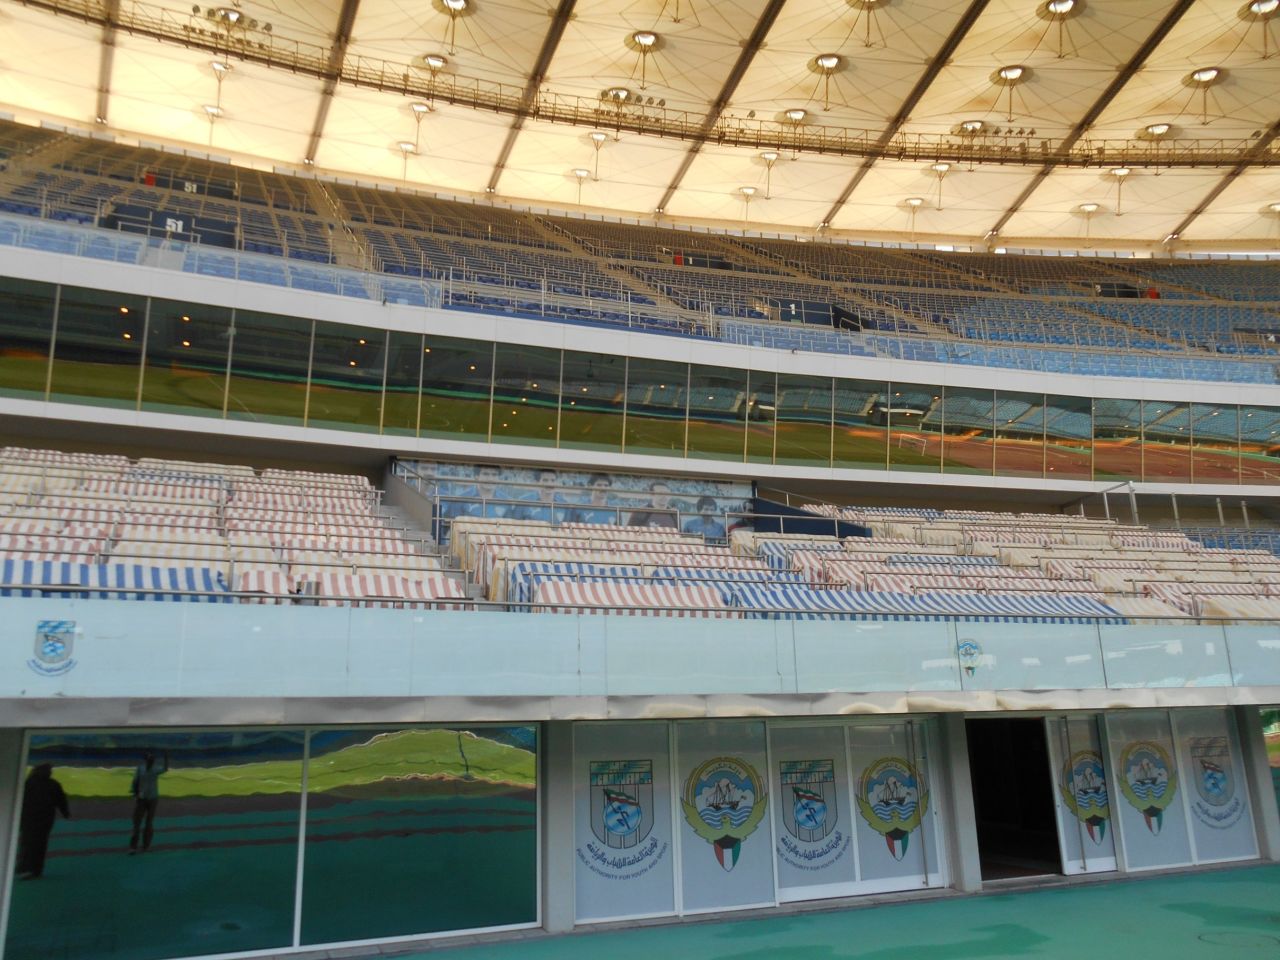 Special care was taken when designing the arena, with metal bars to separate each row as a security measure. A banner featuring the Kuwait team which qualified for the 1982 World Cup overlooks the pitch. 